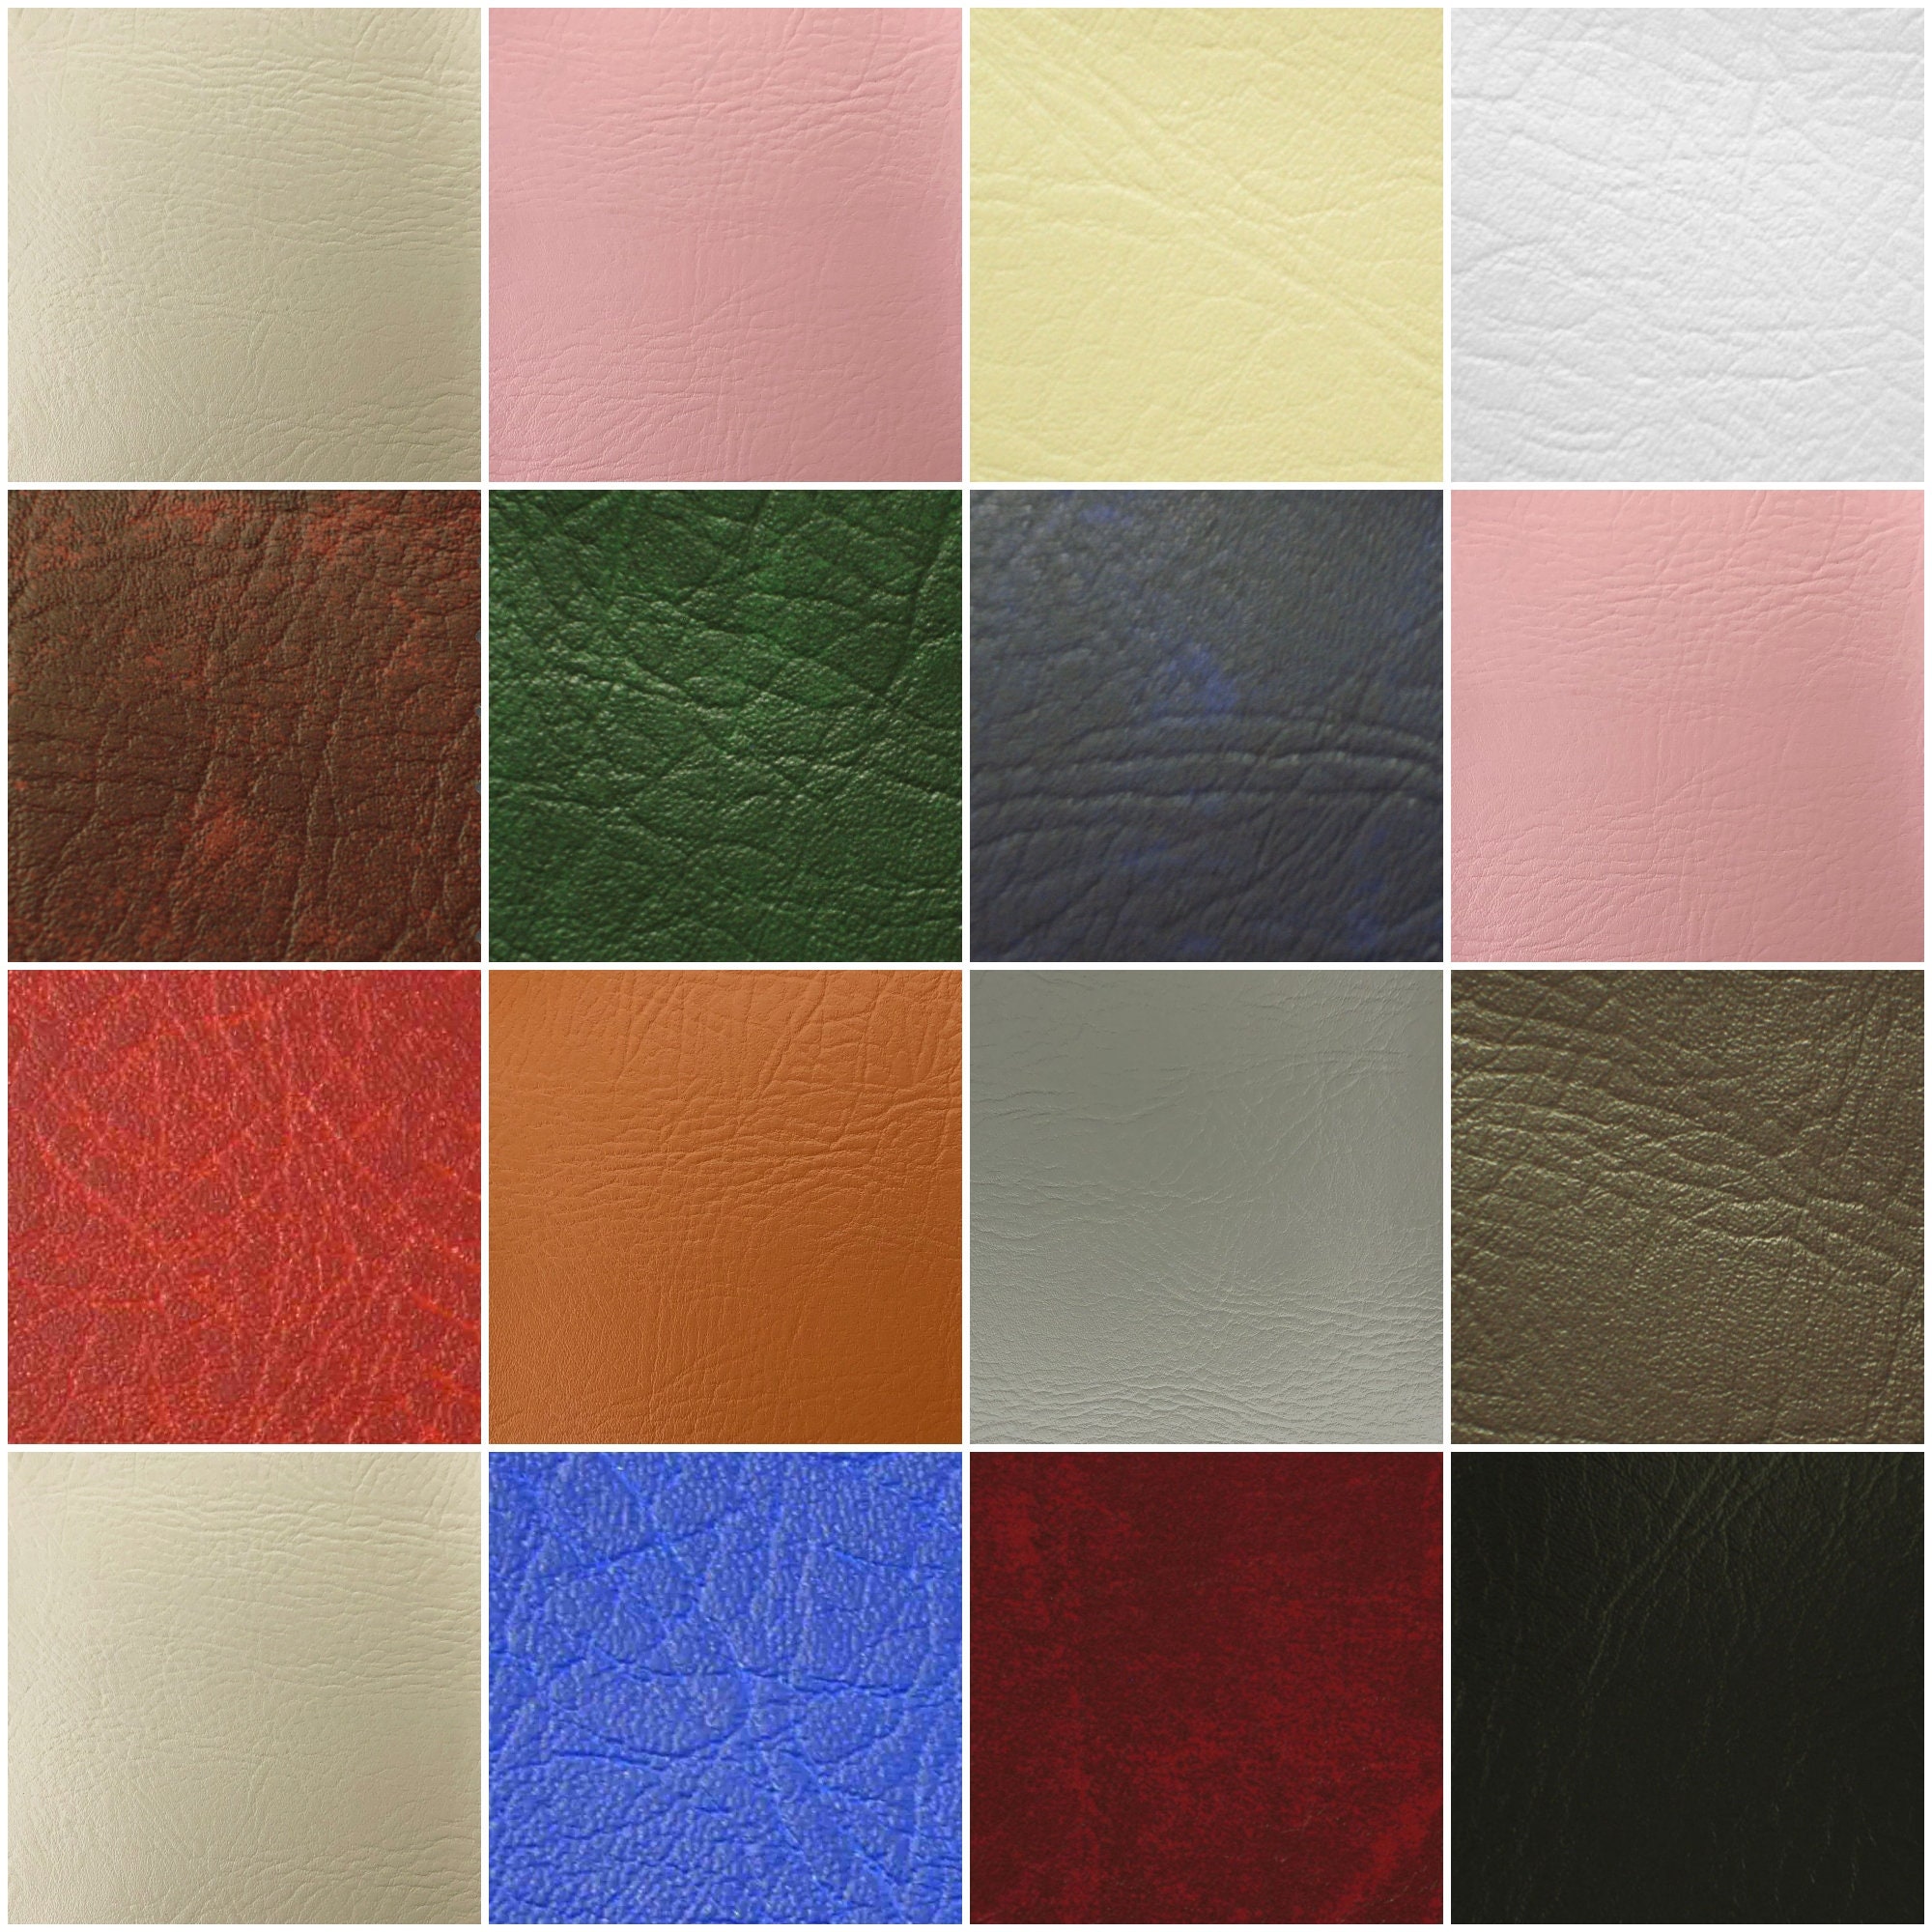 Pearl Faux Leather Sheets, 8.5x11, Cricut Bow Supplies, Synthetic Leather  Sheets, Fabric Leather, Faux Leathers, A4, Earring Supplies, DIY